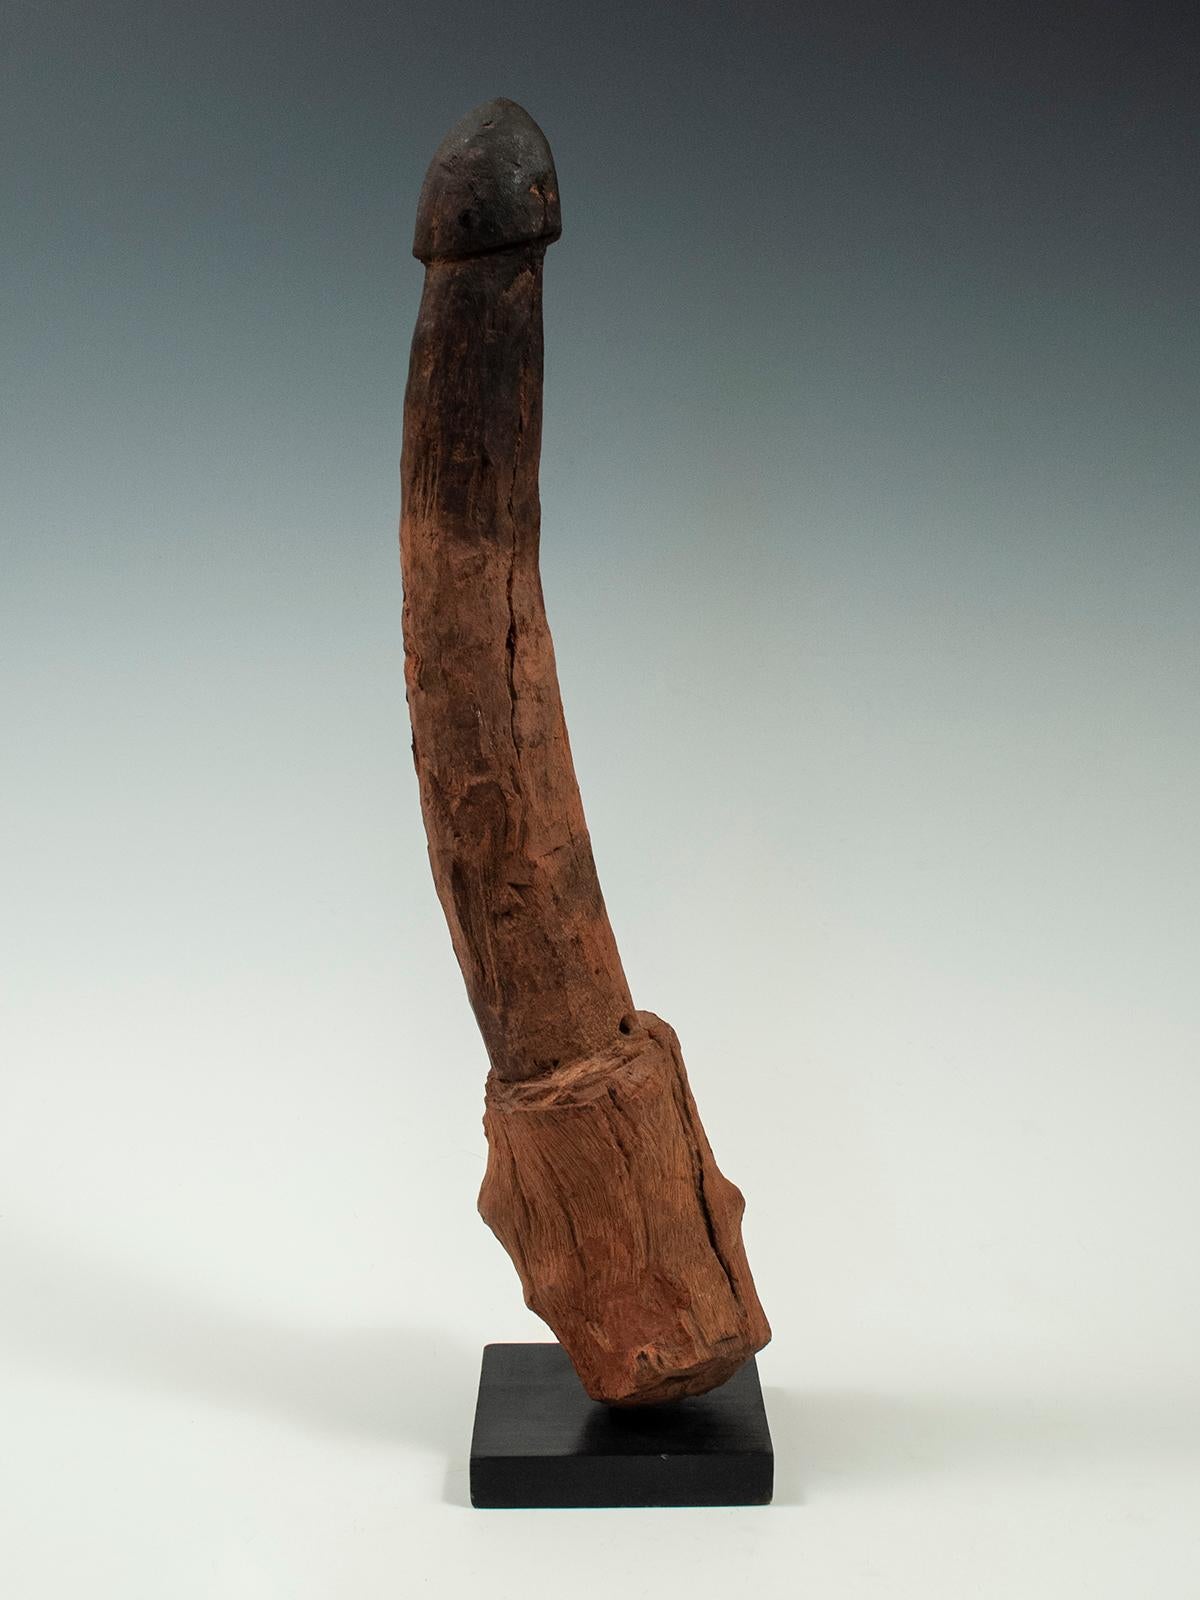 Tribal Late 19th-Early 20th Century Wood Legba Phallus, Fon People, West Africa